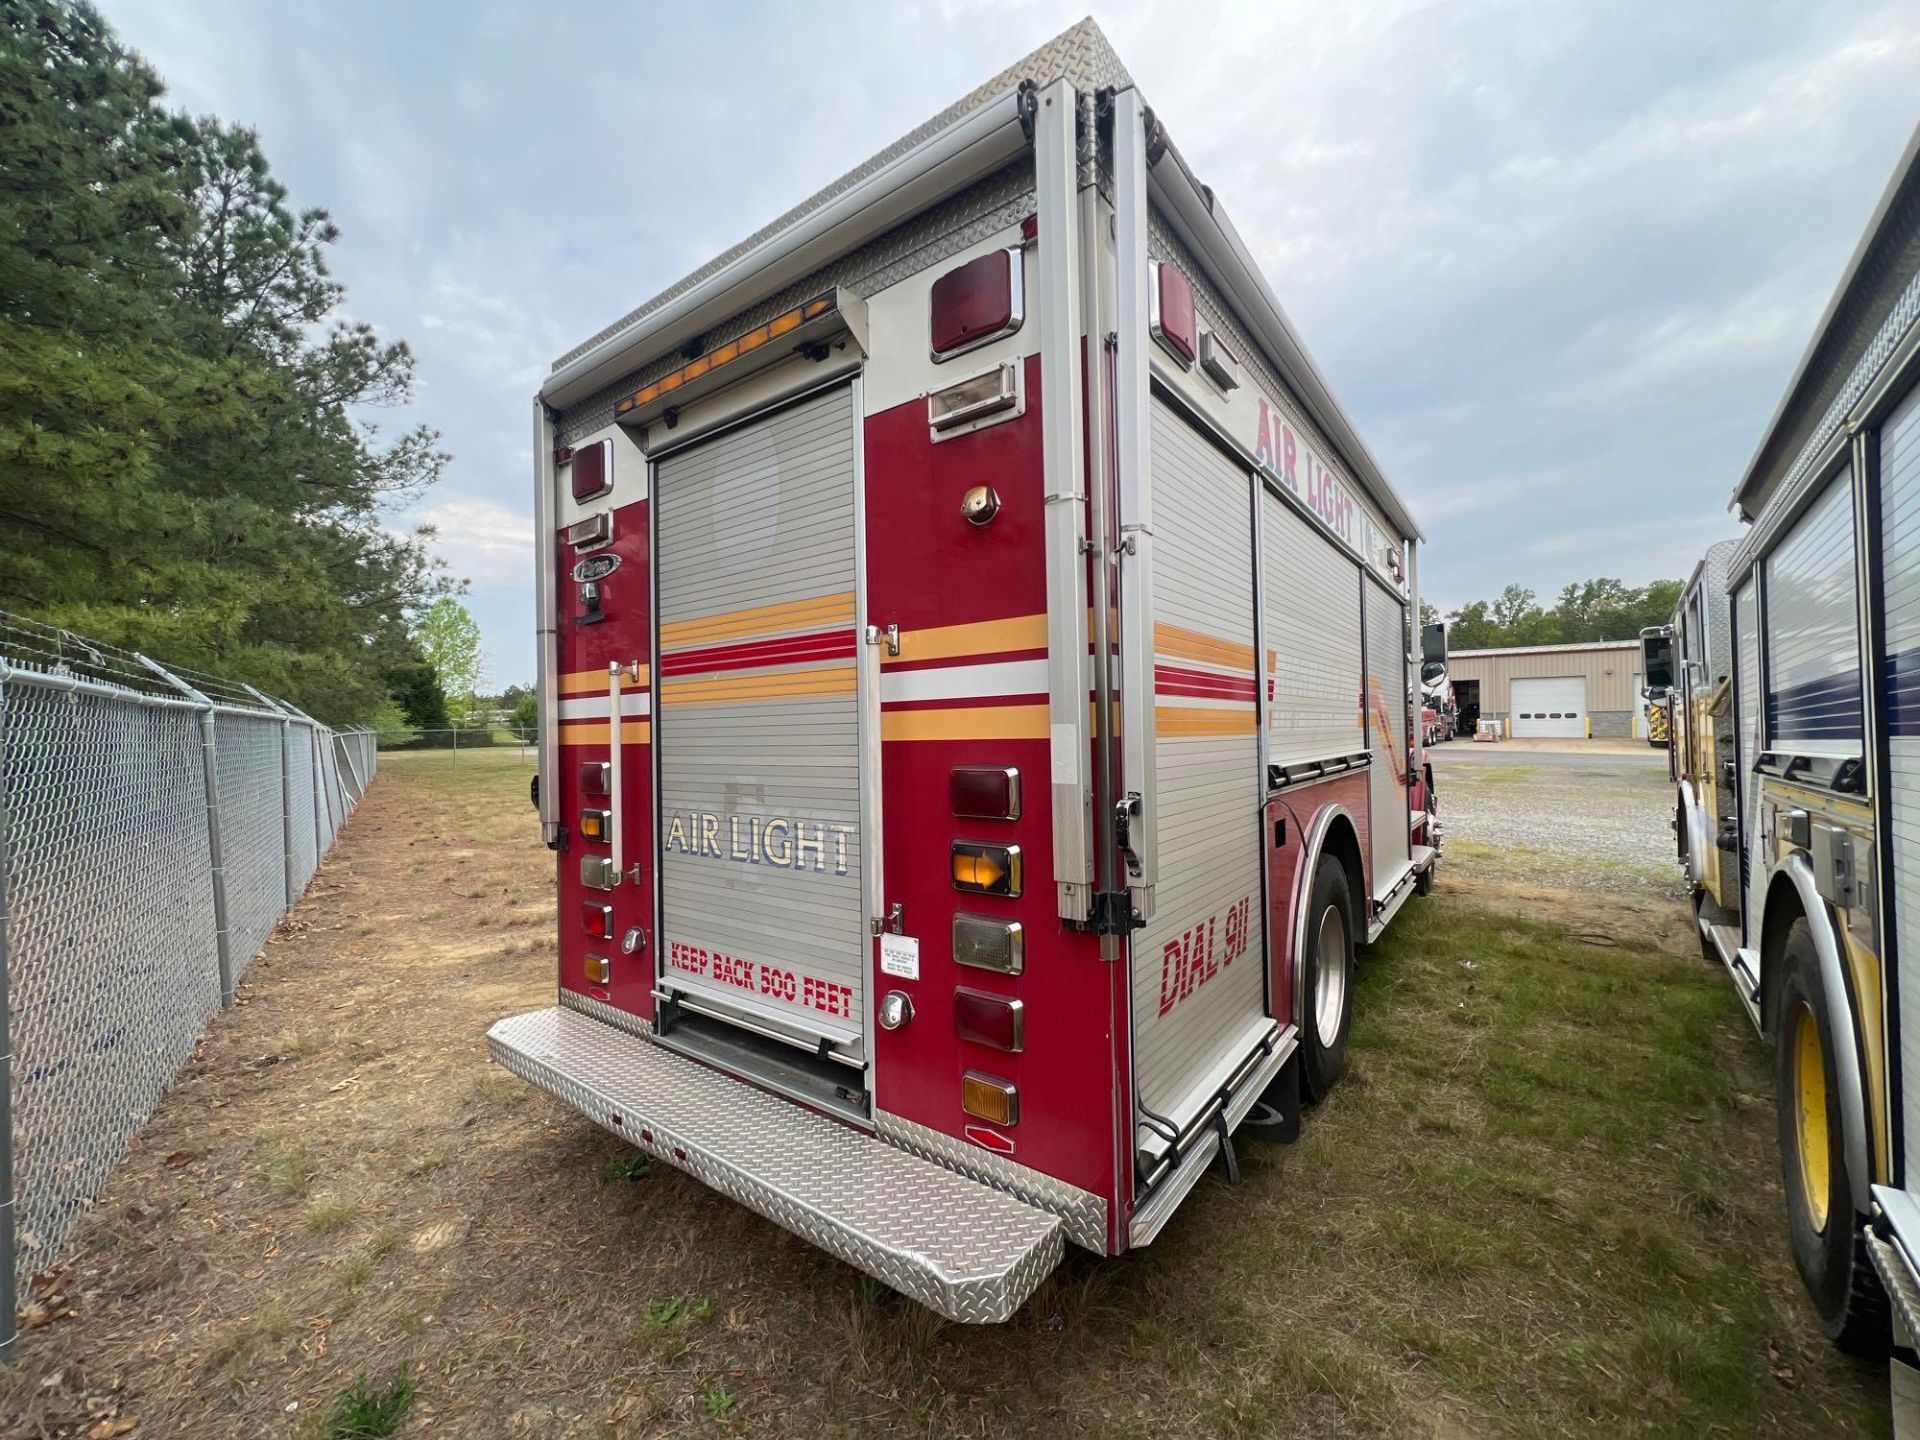 2001 Freightliner FL70 Fire/Rescue Truck - Image 3 of 24